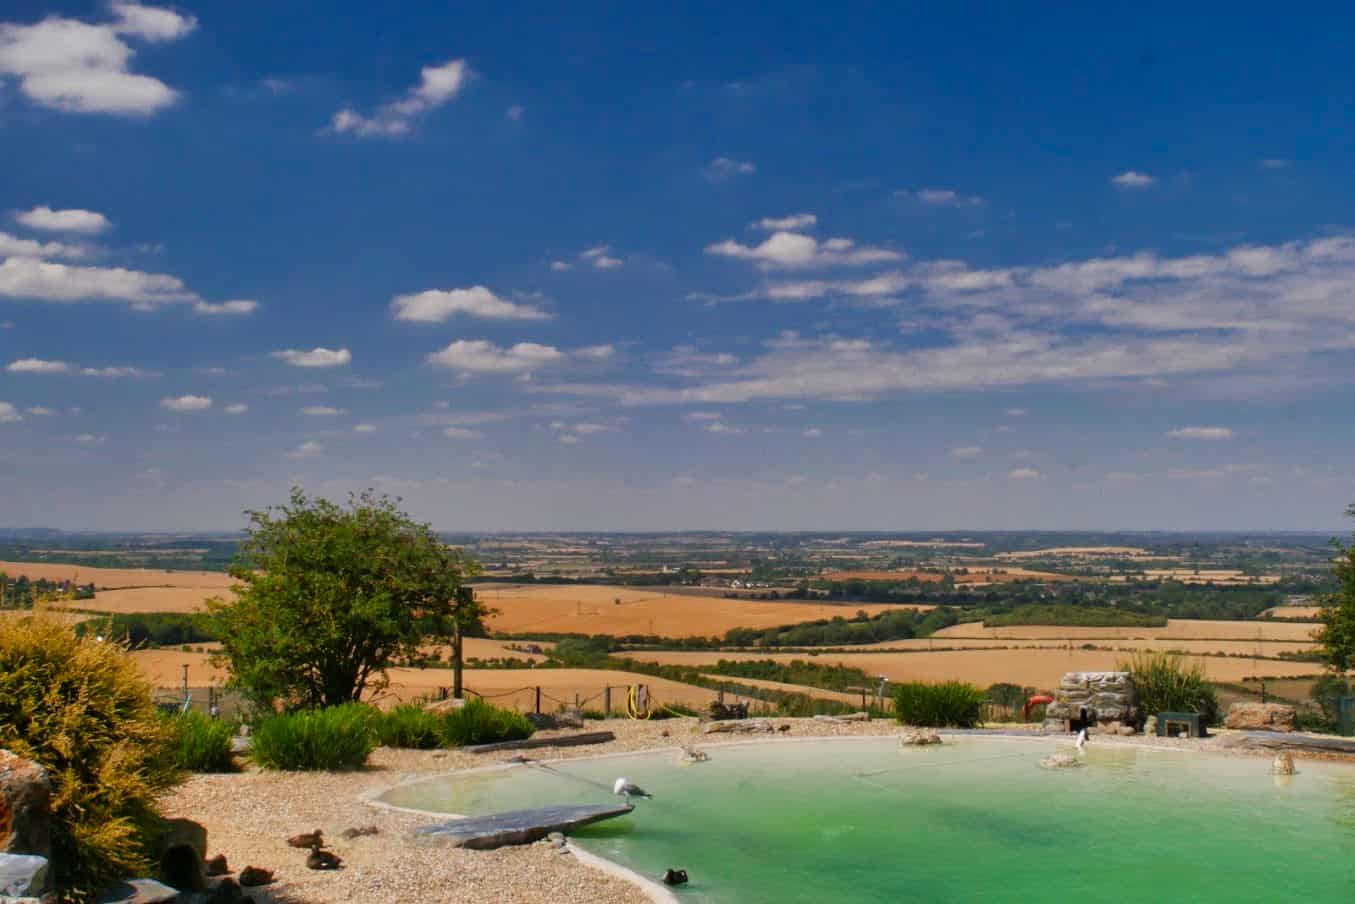 A penguin pool overlooking hills and fields